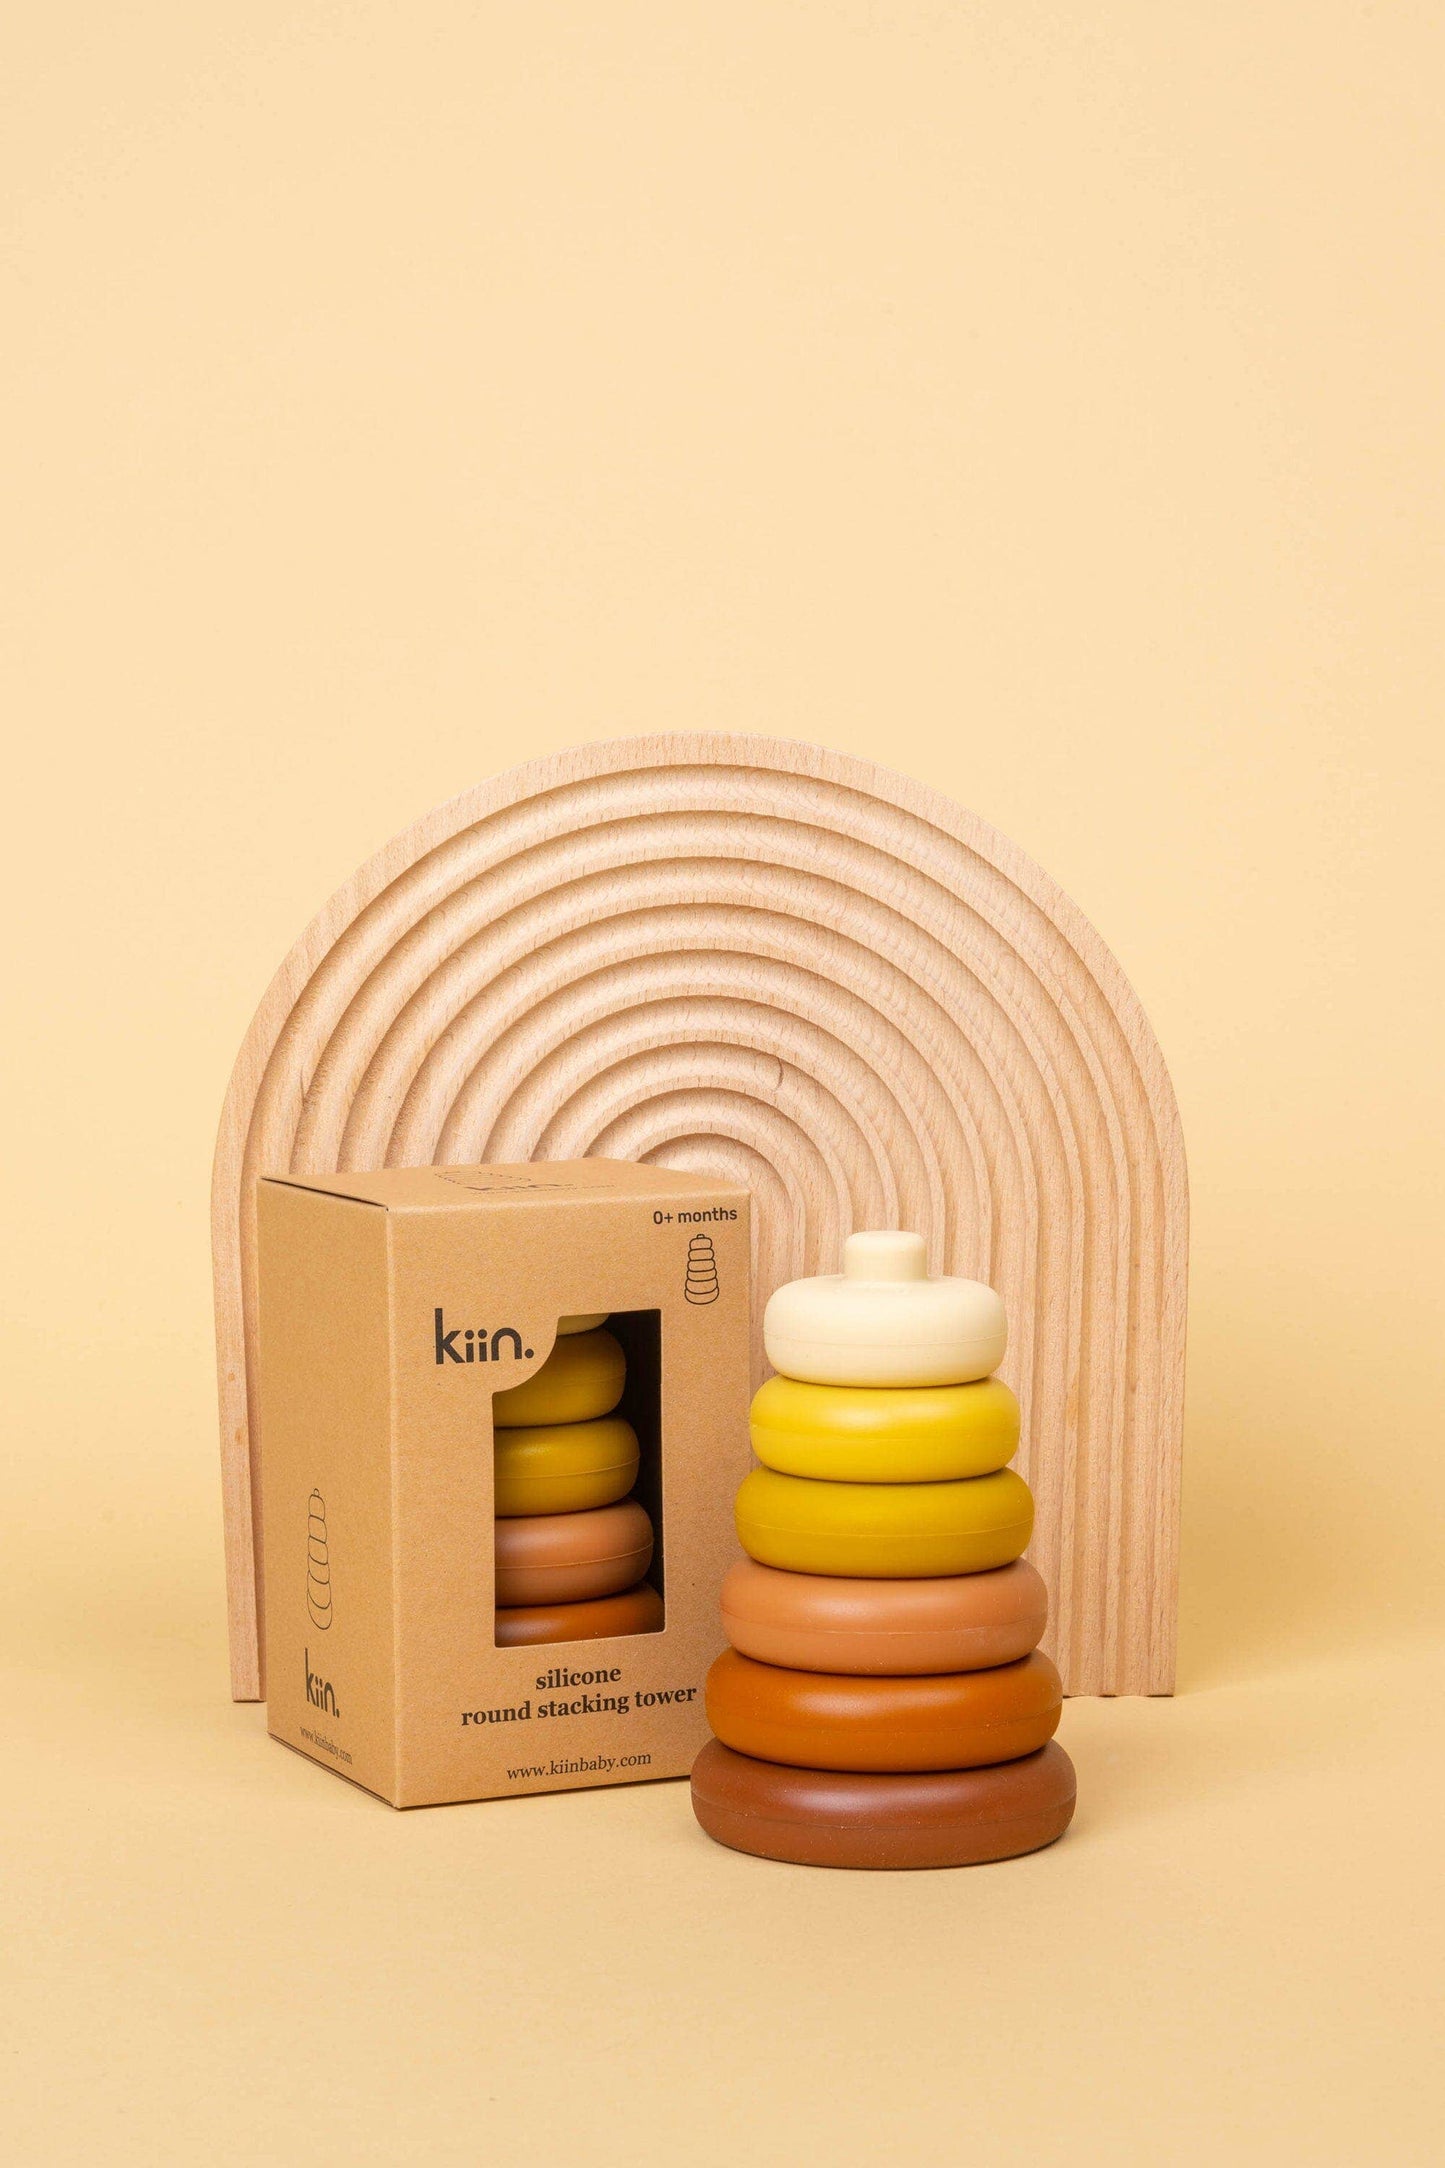 Round Stacking Tower Toy